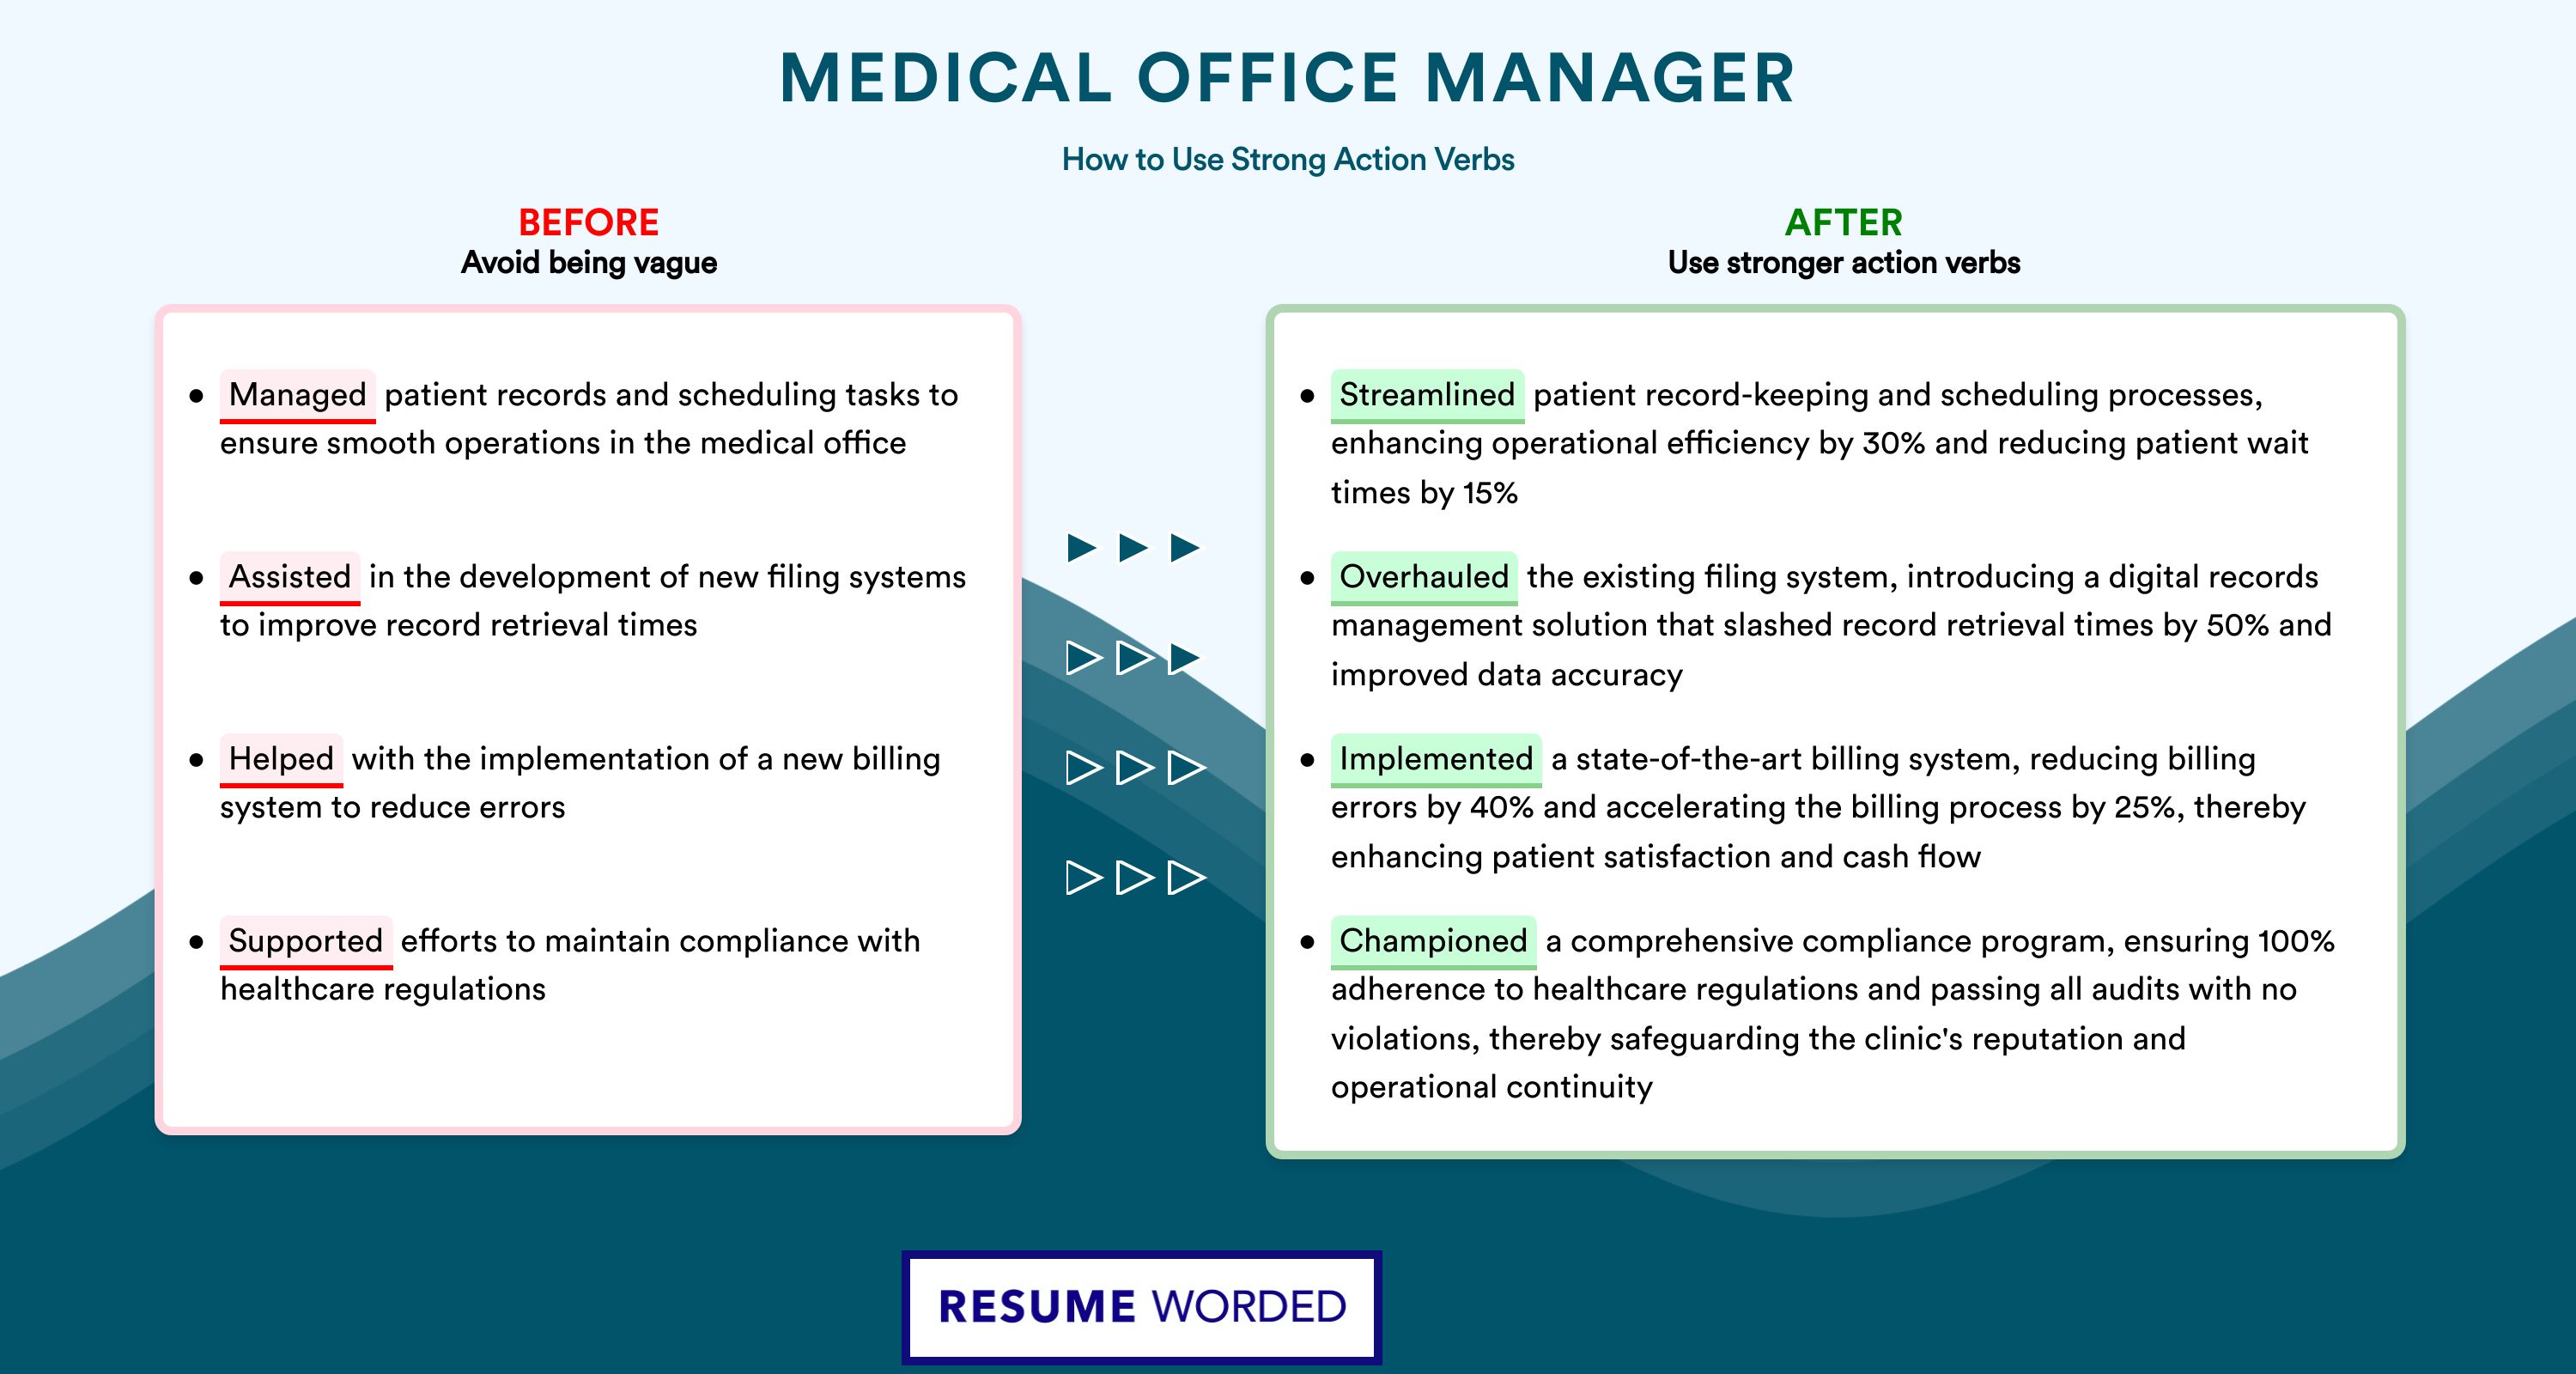 Action Verbs for Medical Office Manager